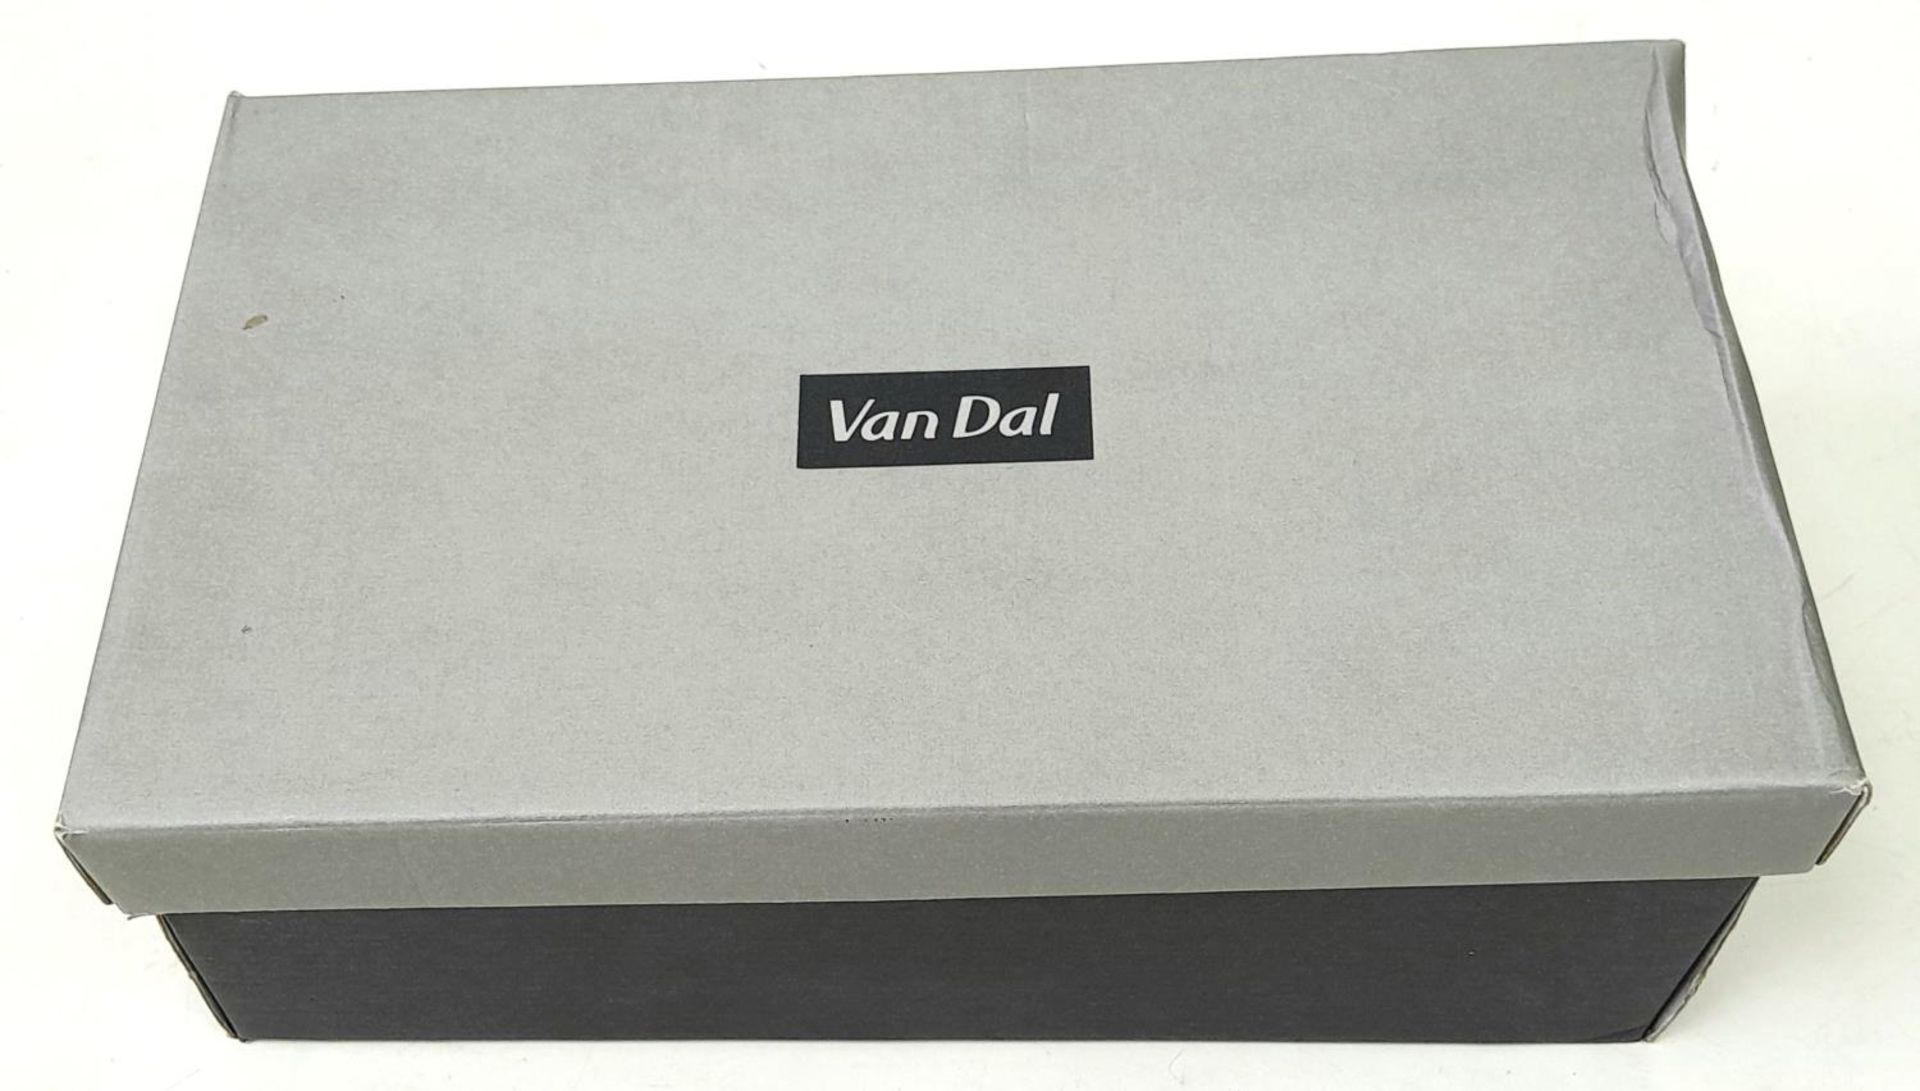 An Unused pair of "Twilight" lacquered ladies shoes by Van Dal, Size 5 ,1.5" heel. In box. - Image 10 of 10